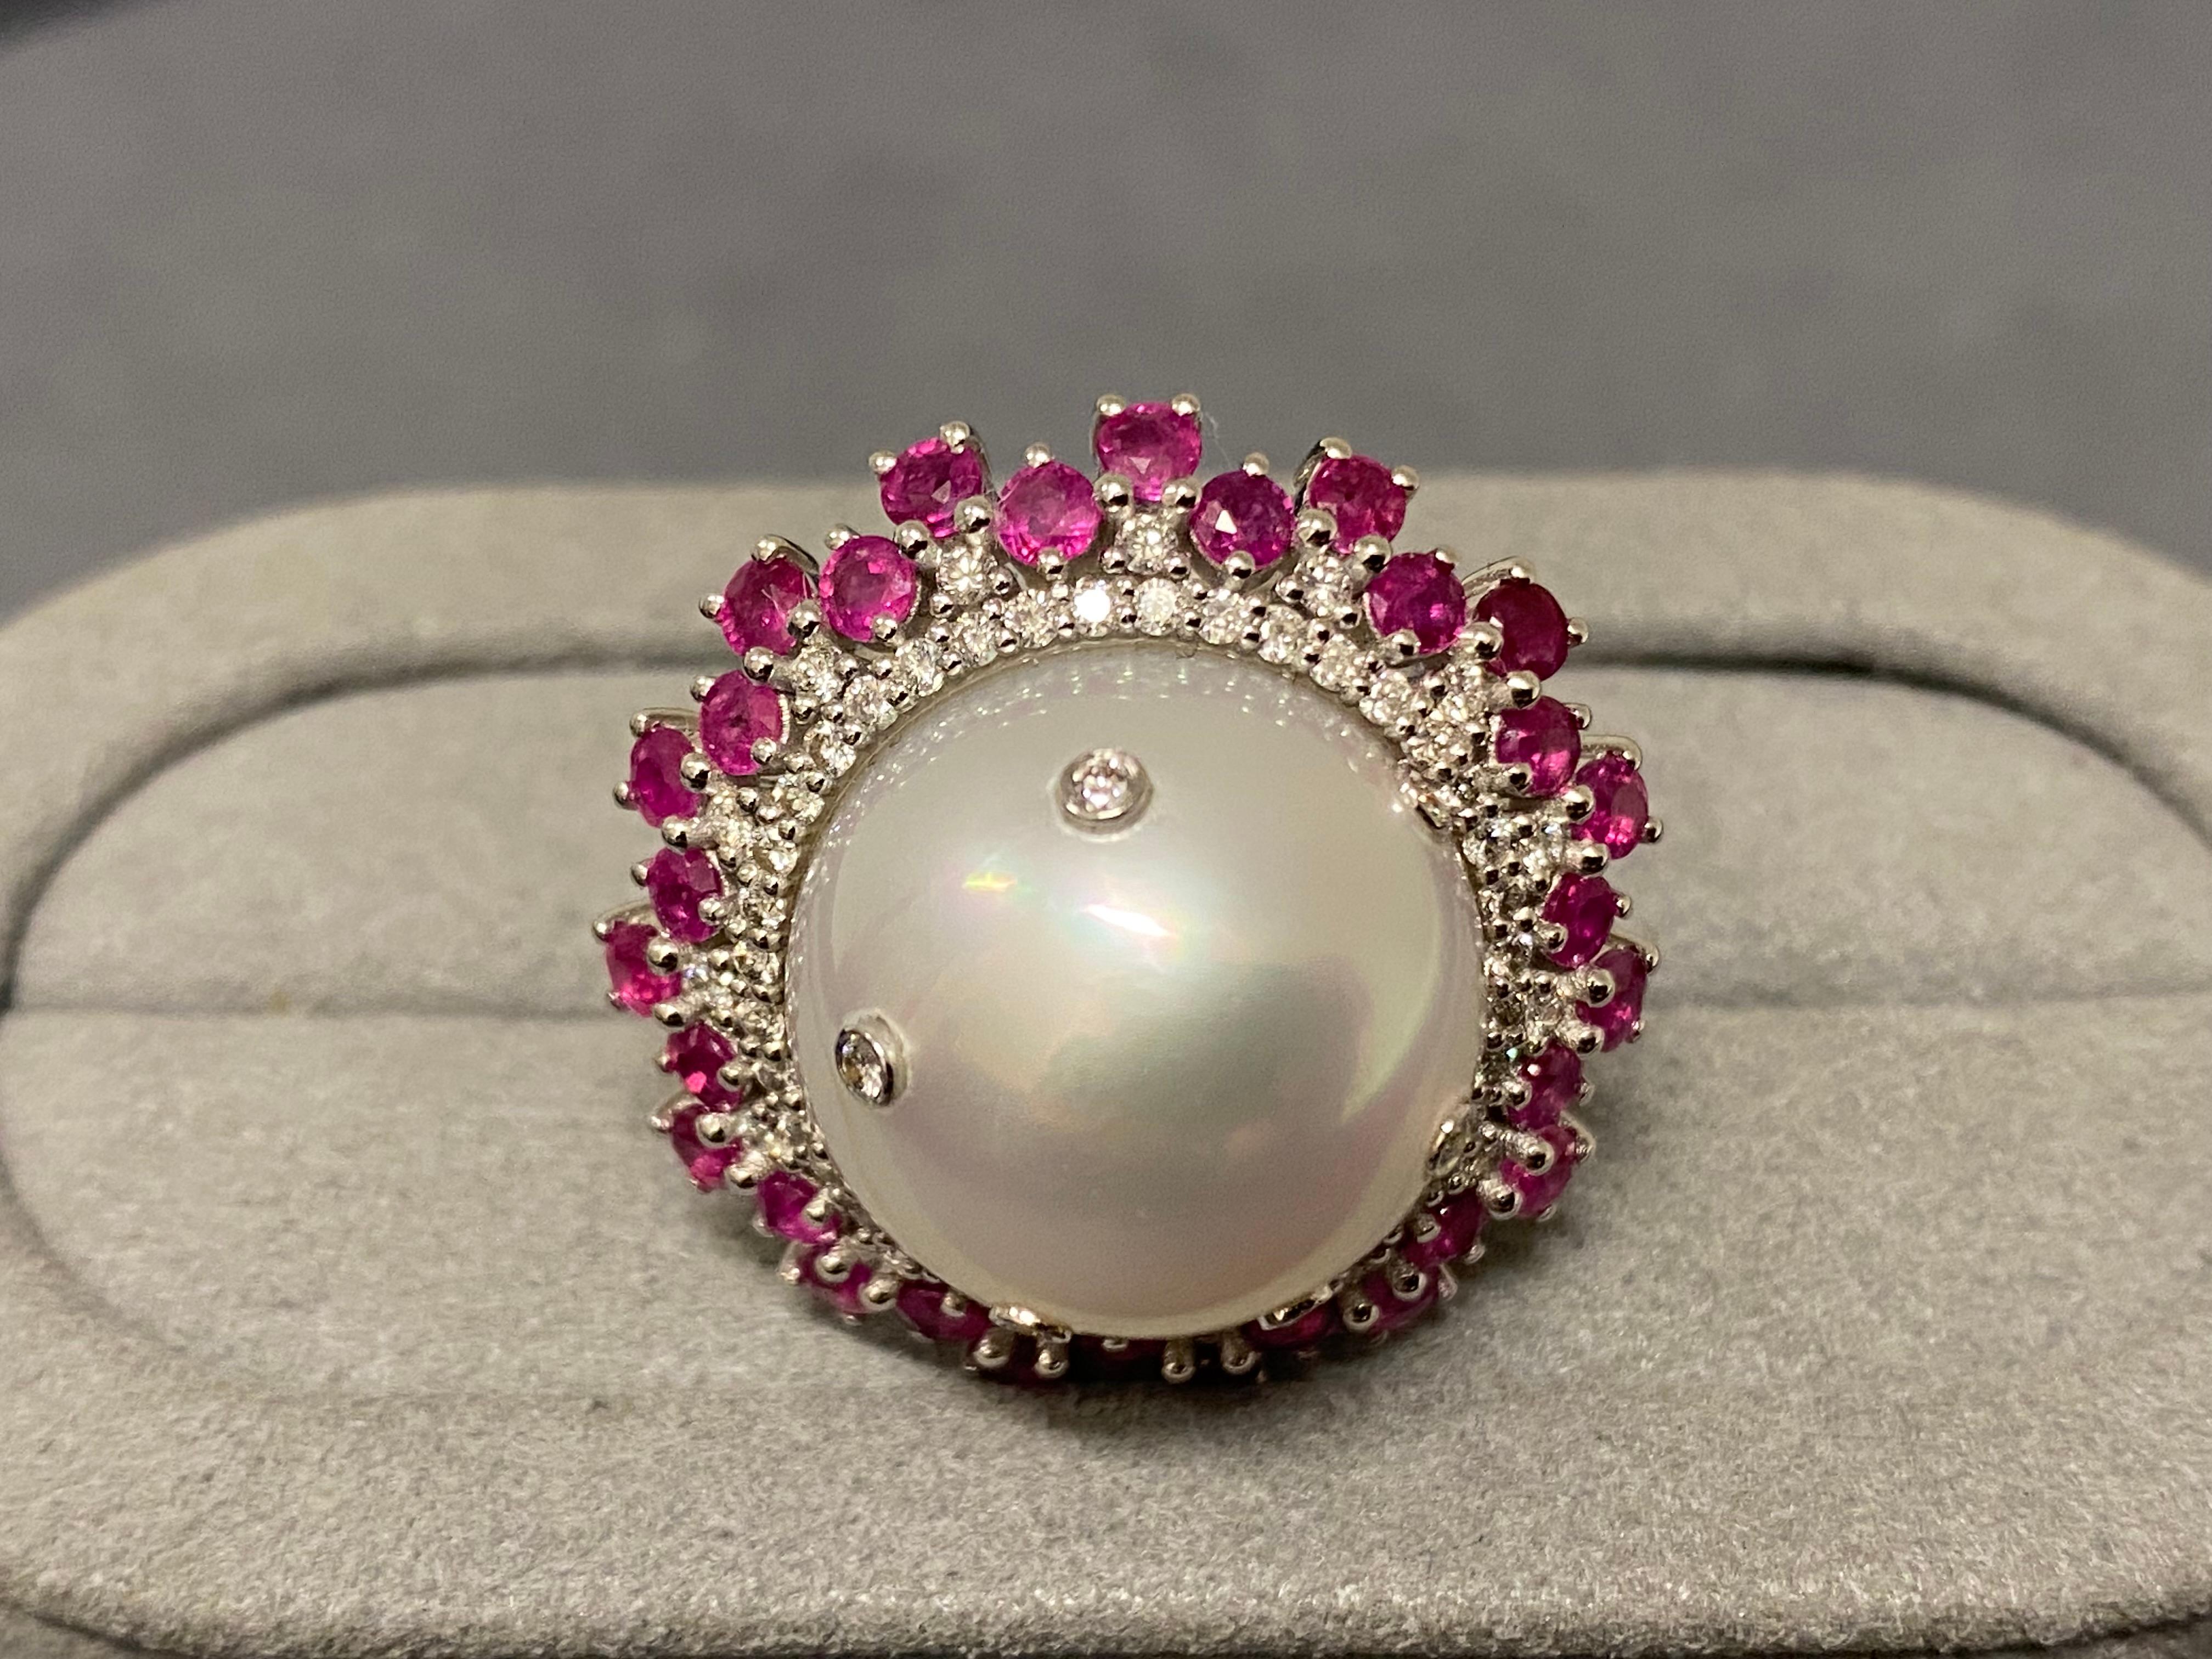 A 16.7 mm round white colour south sea pearl, ruby and diamonds ring in 18k white gold. This is a cluster ring design with diamond and ruby paves surrounding the pearl. The inner layer is the diamond pave and the next layer consists of diamond and